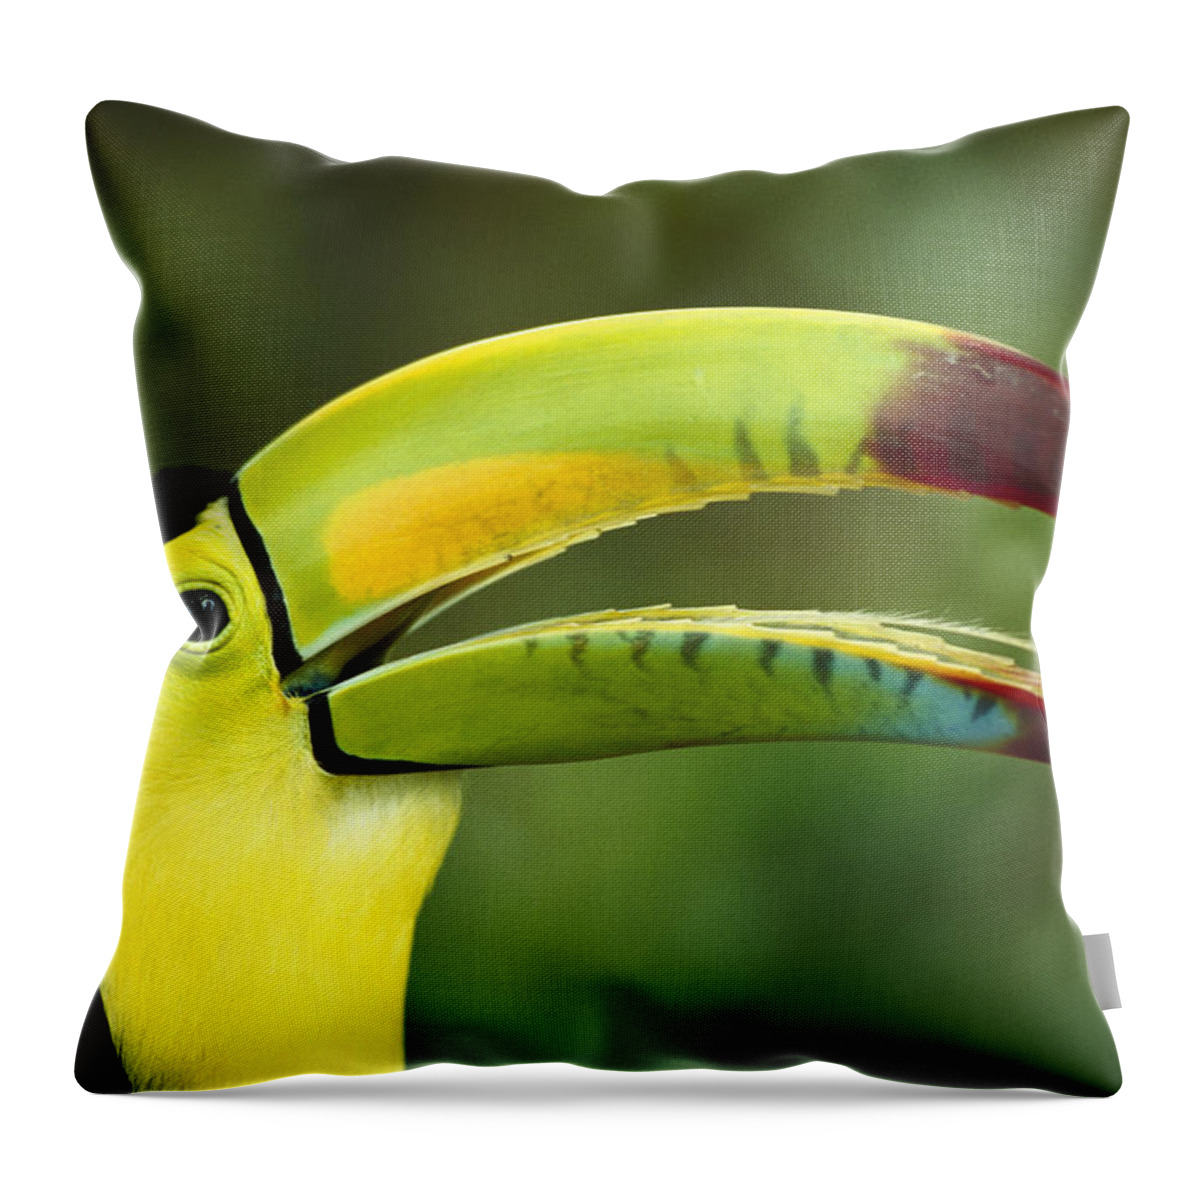 Feb0514 Throw Pillow featuring the photograph Keel-billed Toucan #1 by Gerry Ellis